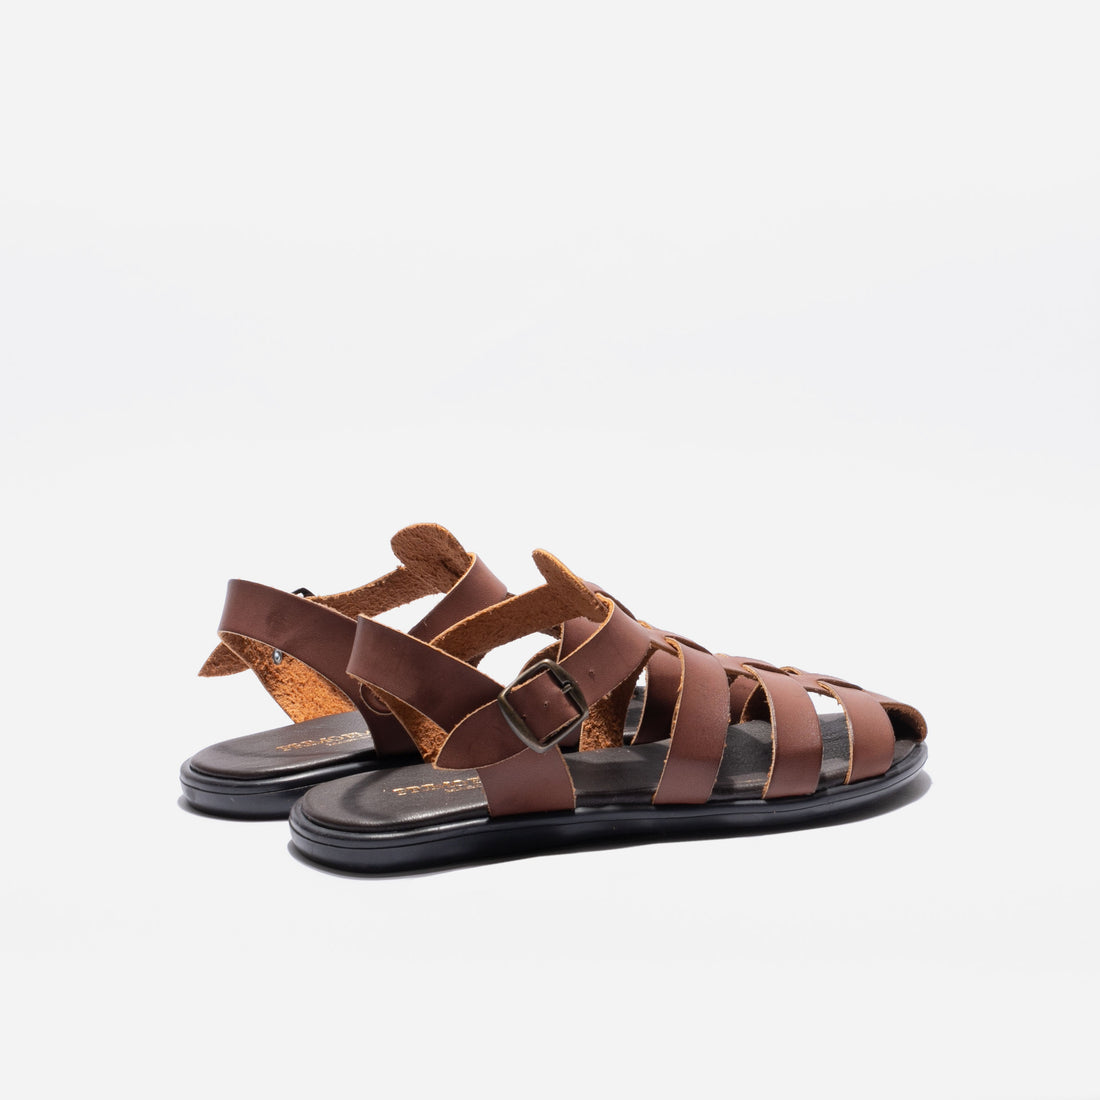 Sandal with three bands - Moro